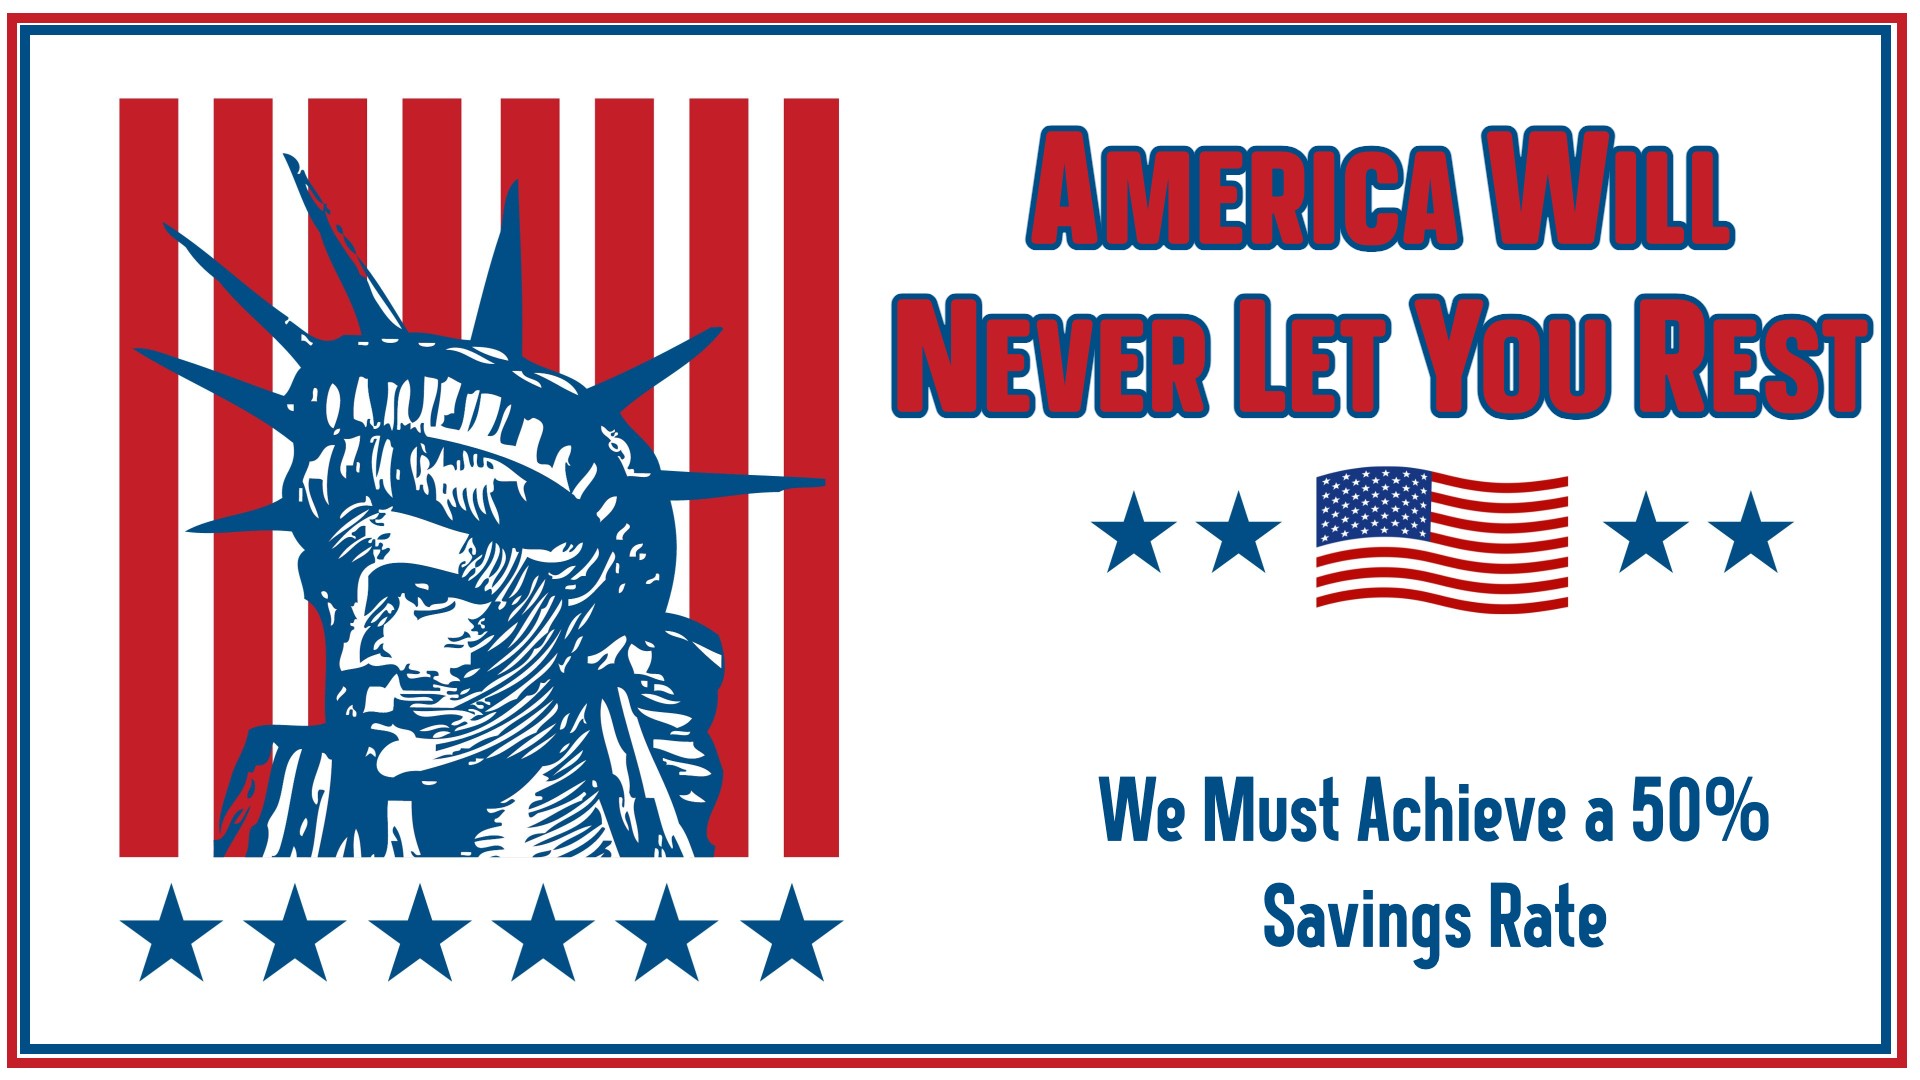 America Will Never Let You Rest: We Must Achieve a 50% Savings Rate